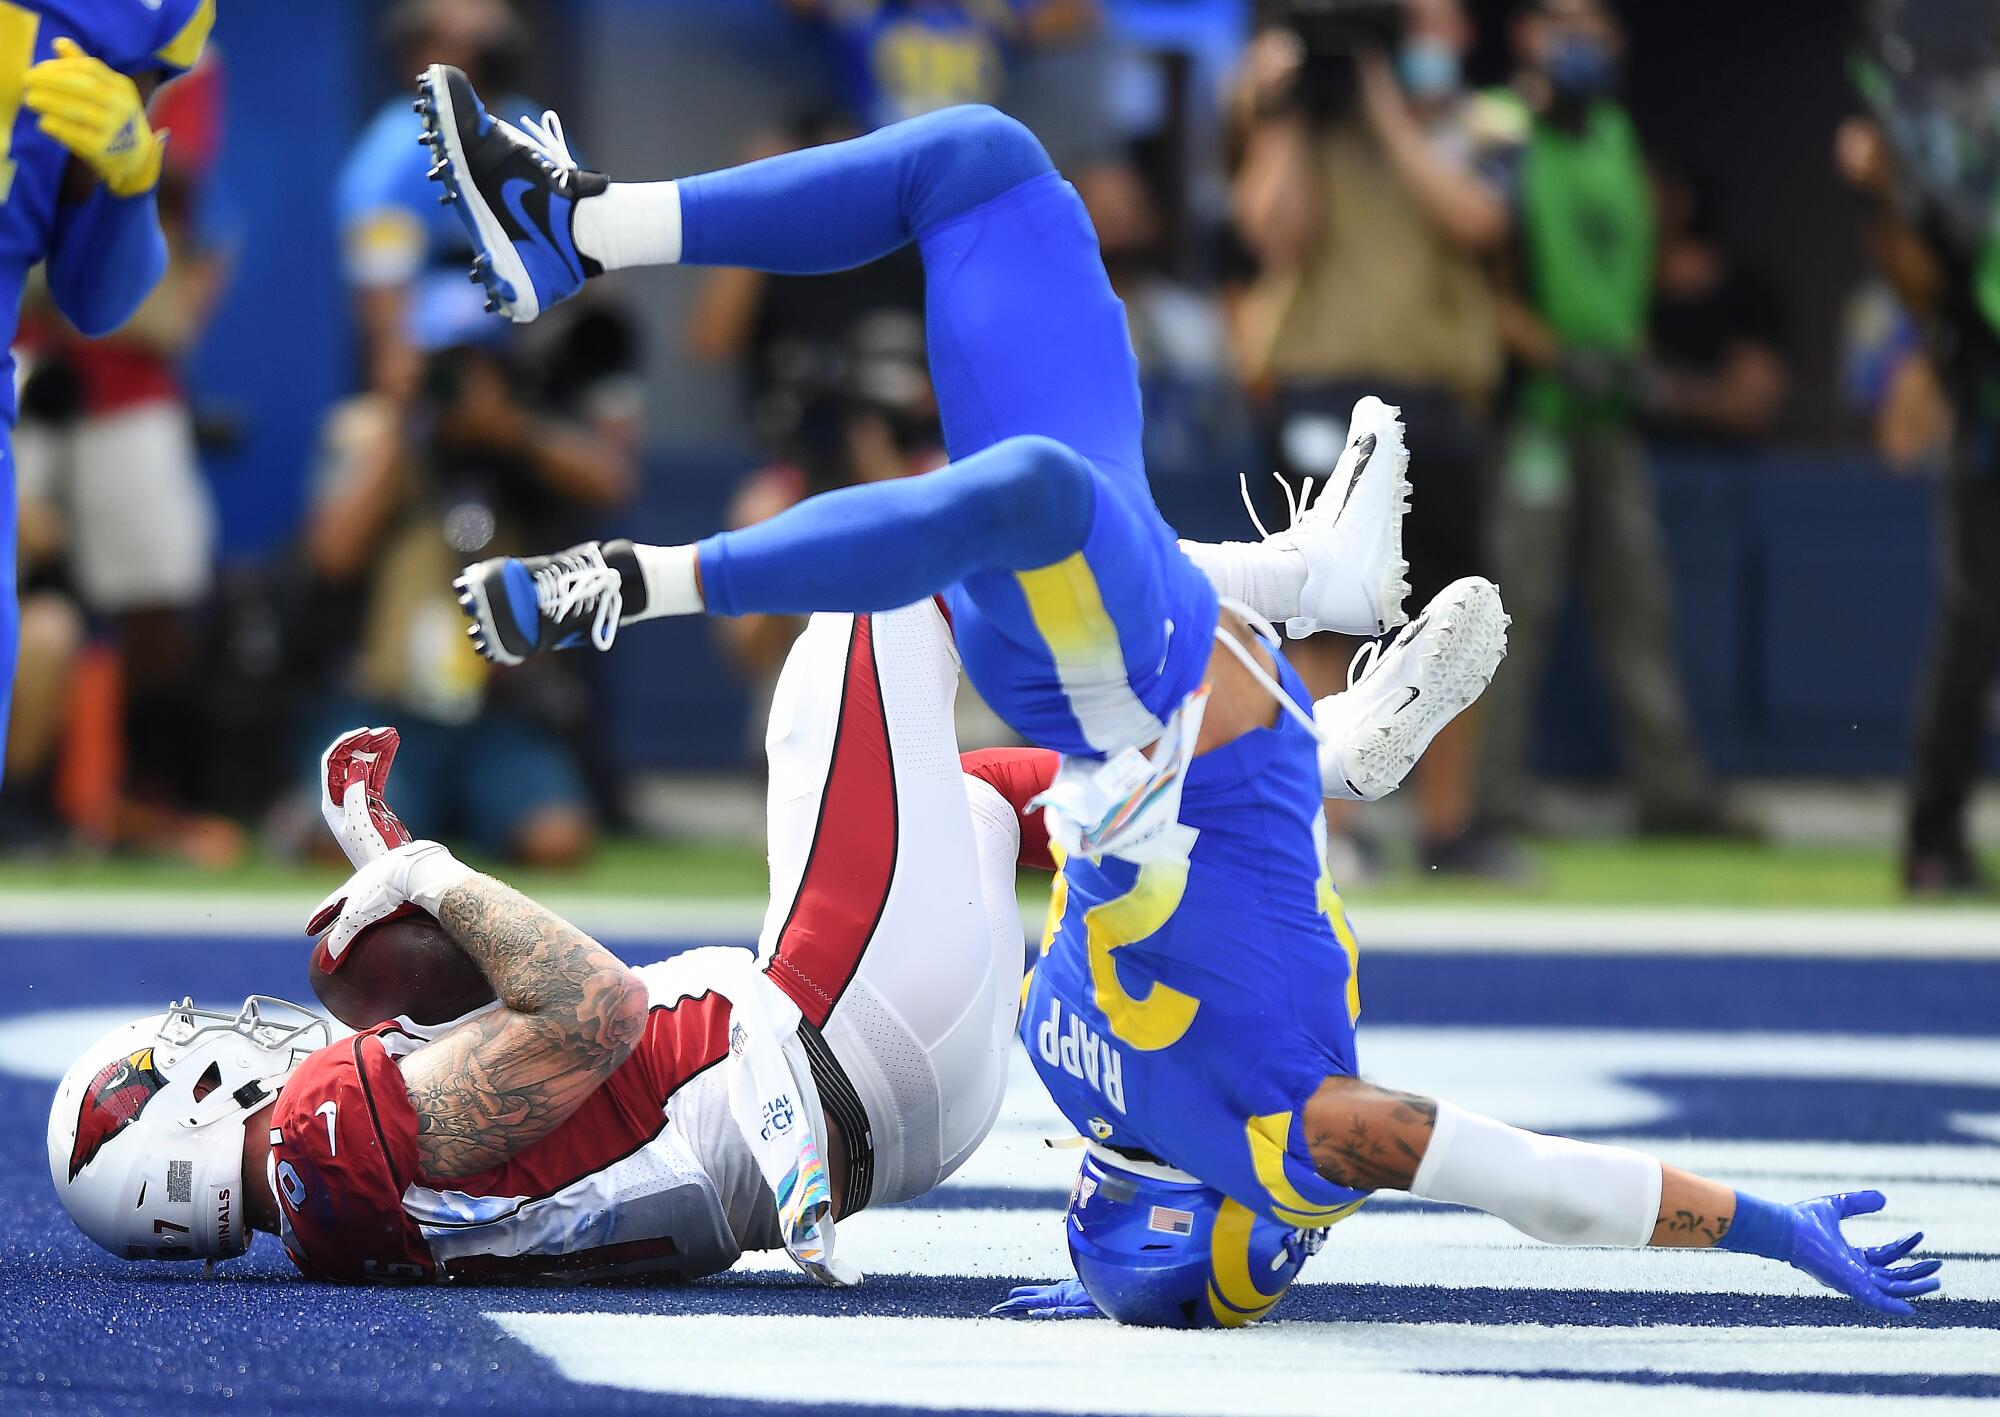 Cardinals tight end Maxx Williams falls after a catch while Rams safety Taylor Rapp defends.